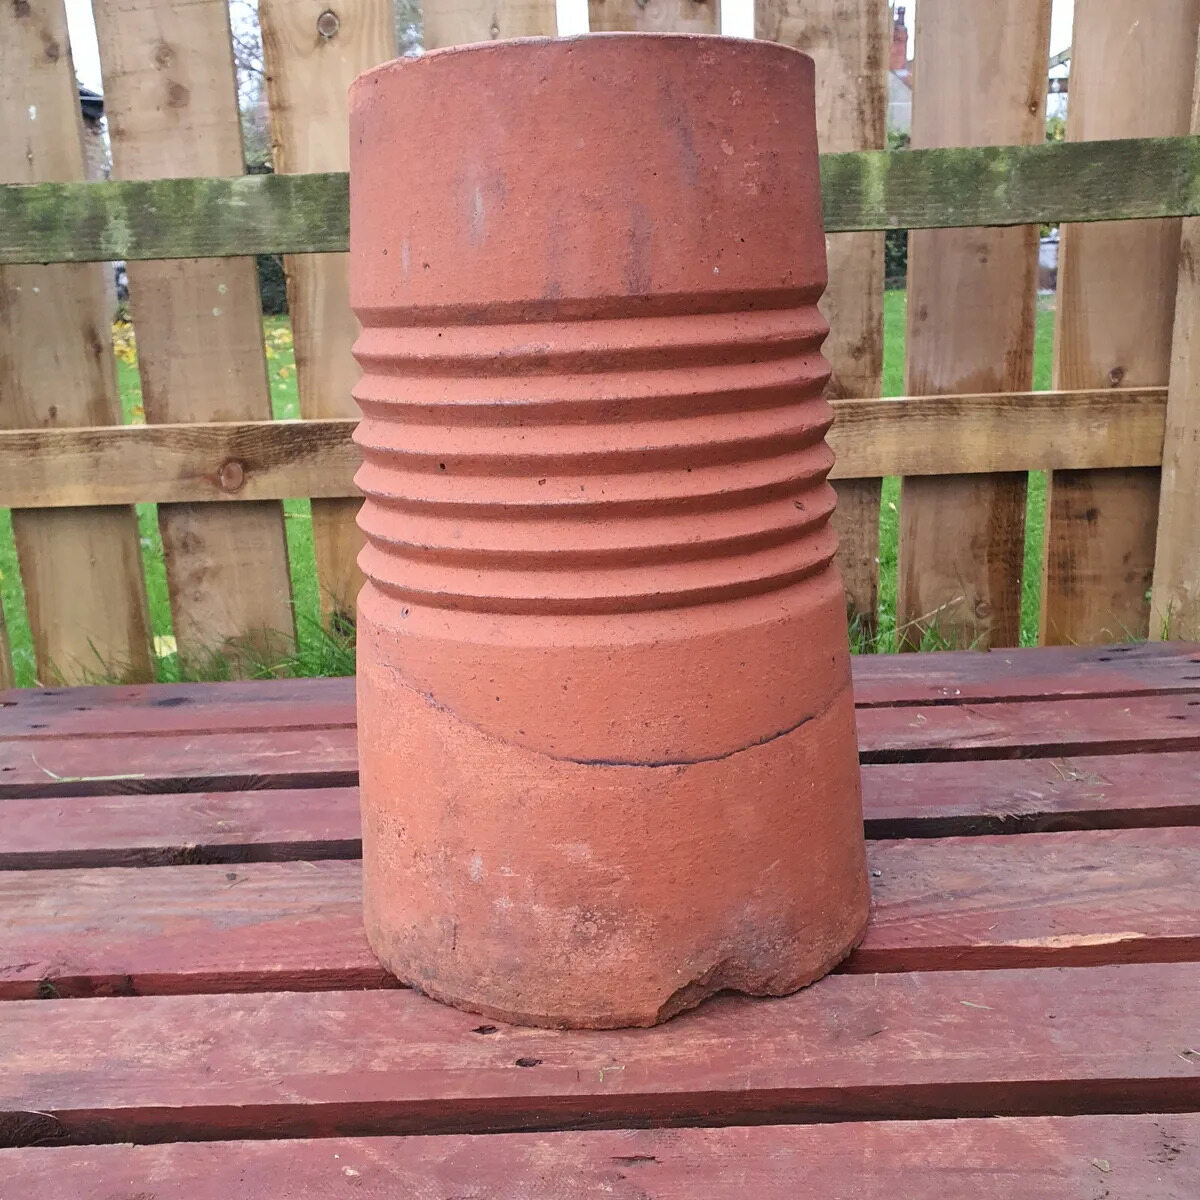 Where Can I Buy A Chimney Pot